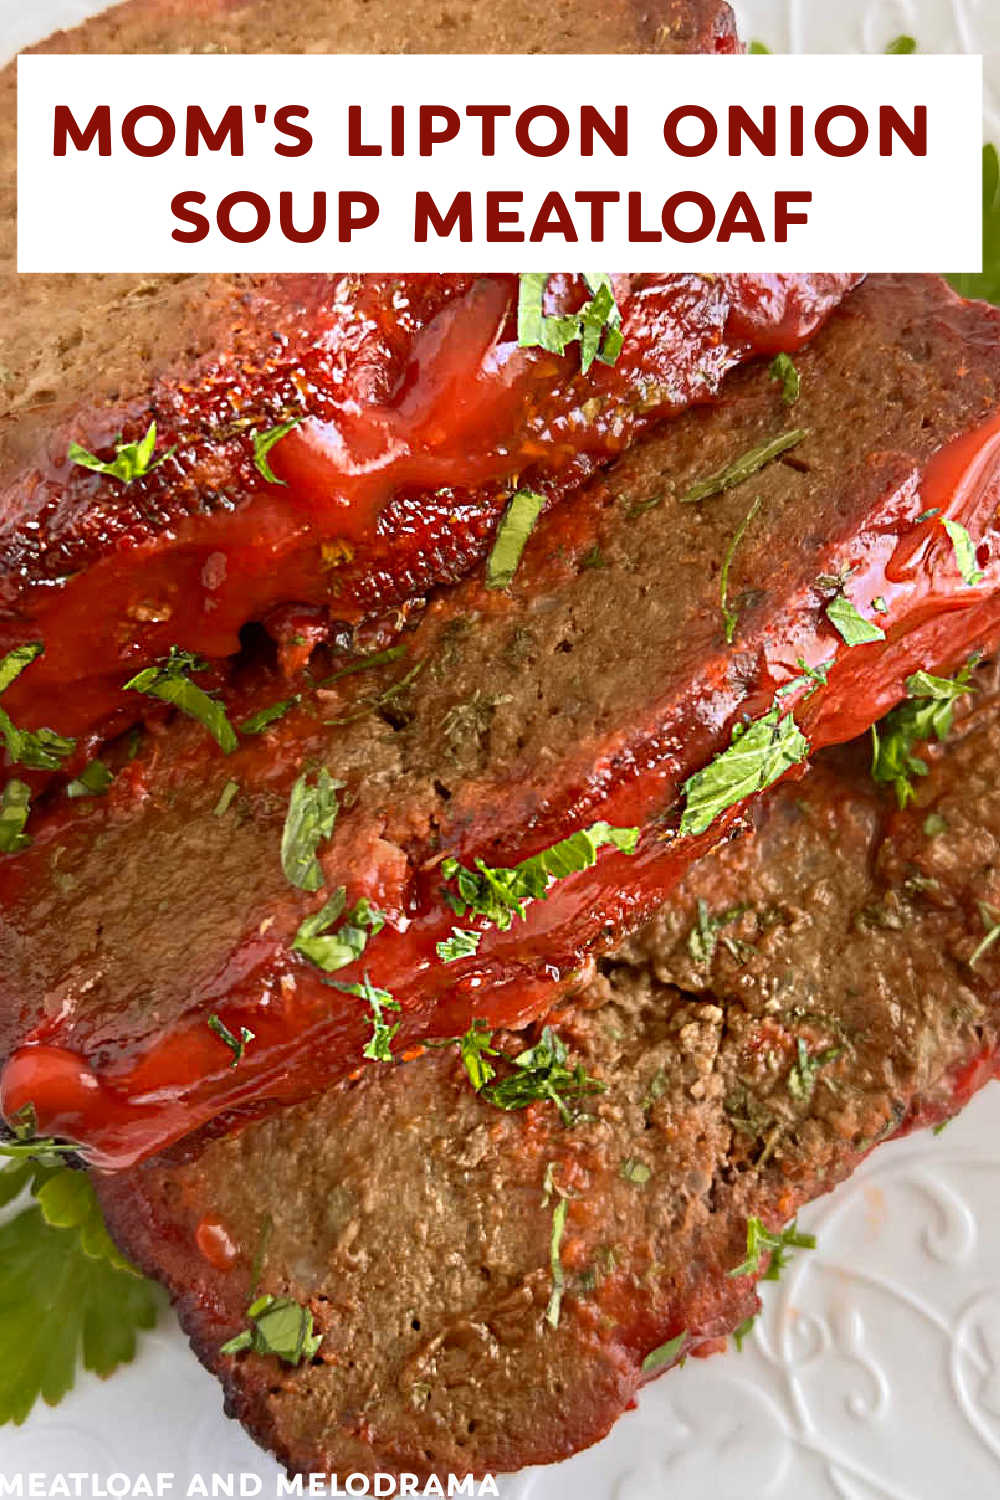 Mom's Lipton Onion Soup Meatloaf Recipe is classic meatloaf with onion soup mix, ground beef and a simple ketchup glaze. Simply the Best! The whole family loves this easy meatloaf recipe, and it's a delicious dinner for busy weeknights! via @meamel